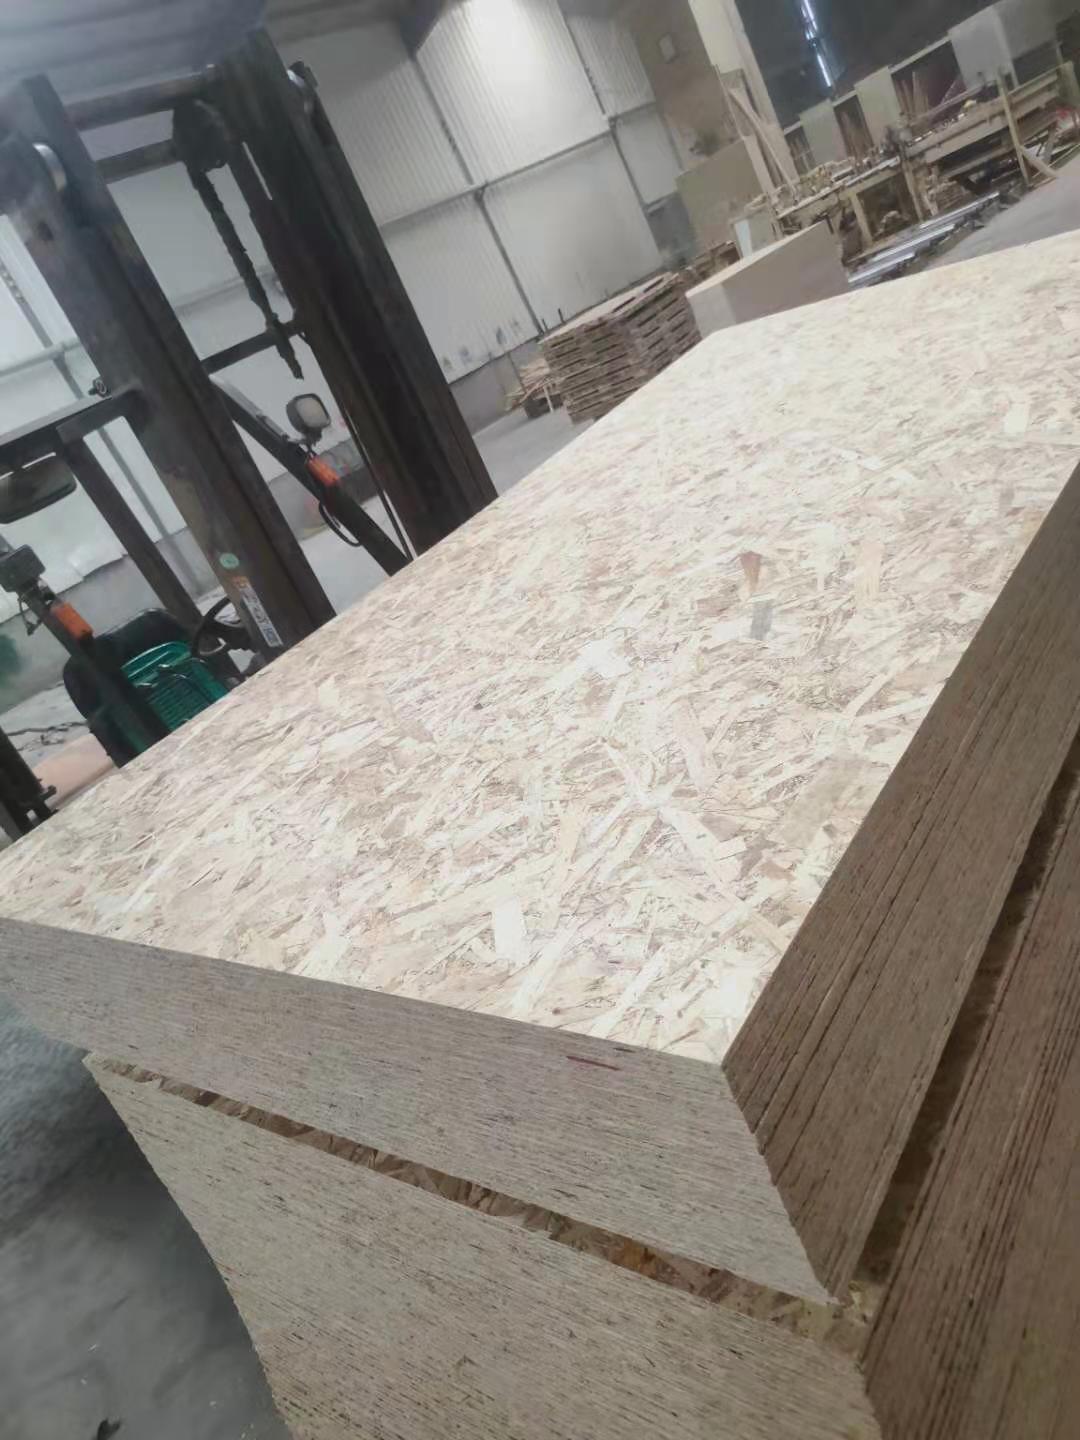 Panel 9mm/12mm/15mm/16mm/18mm/25mm/30mm/40mm Particle Board From China Professional OSB Supplier for Building Construction Material